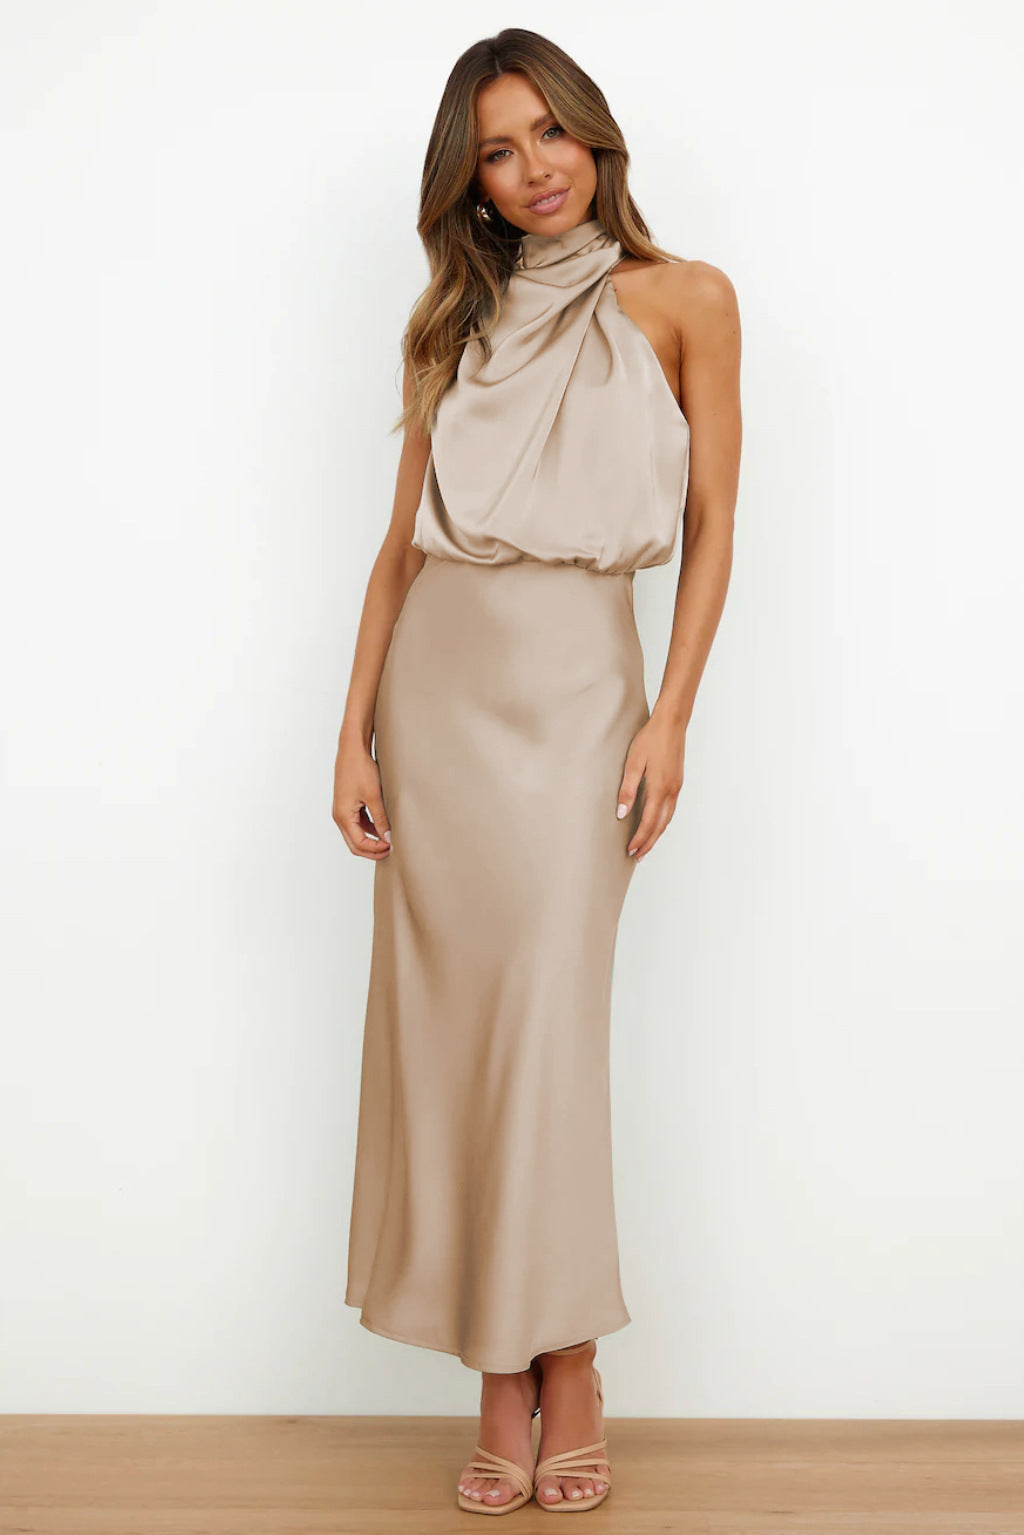 The beauty of satin: high-end satin-feeling long dress with halter neck and off-the-shoulder